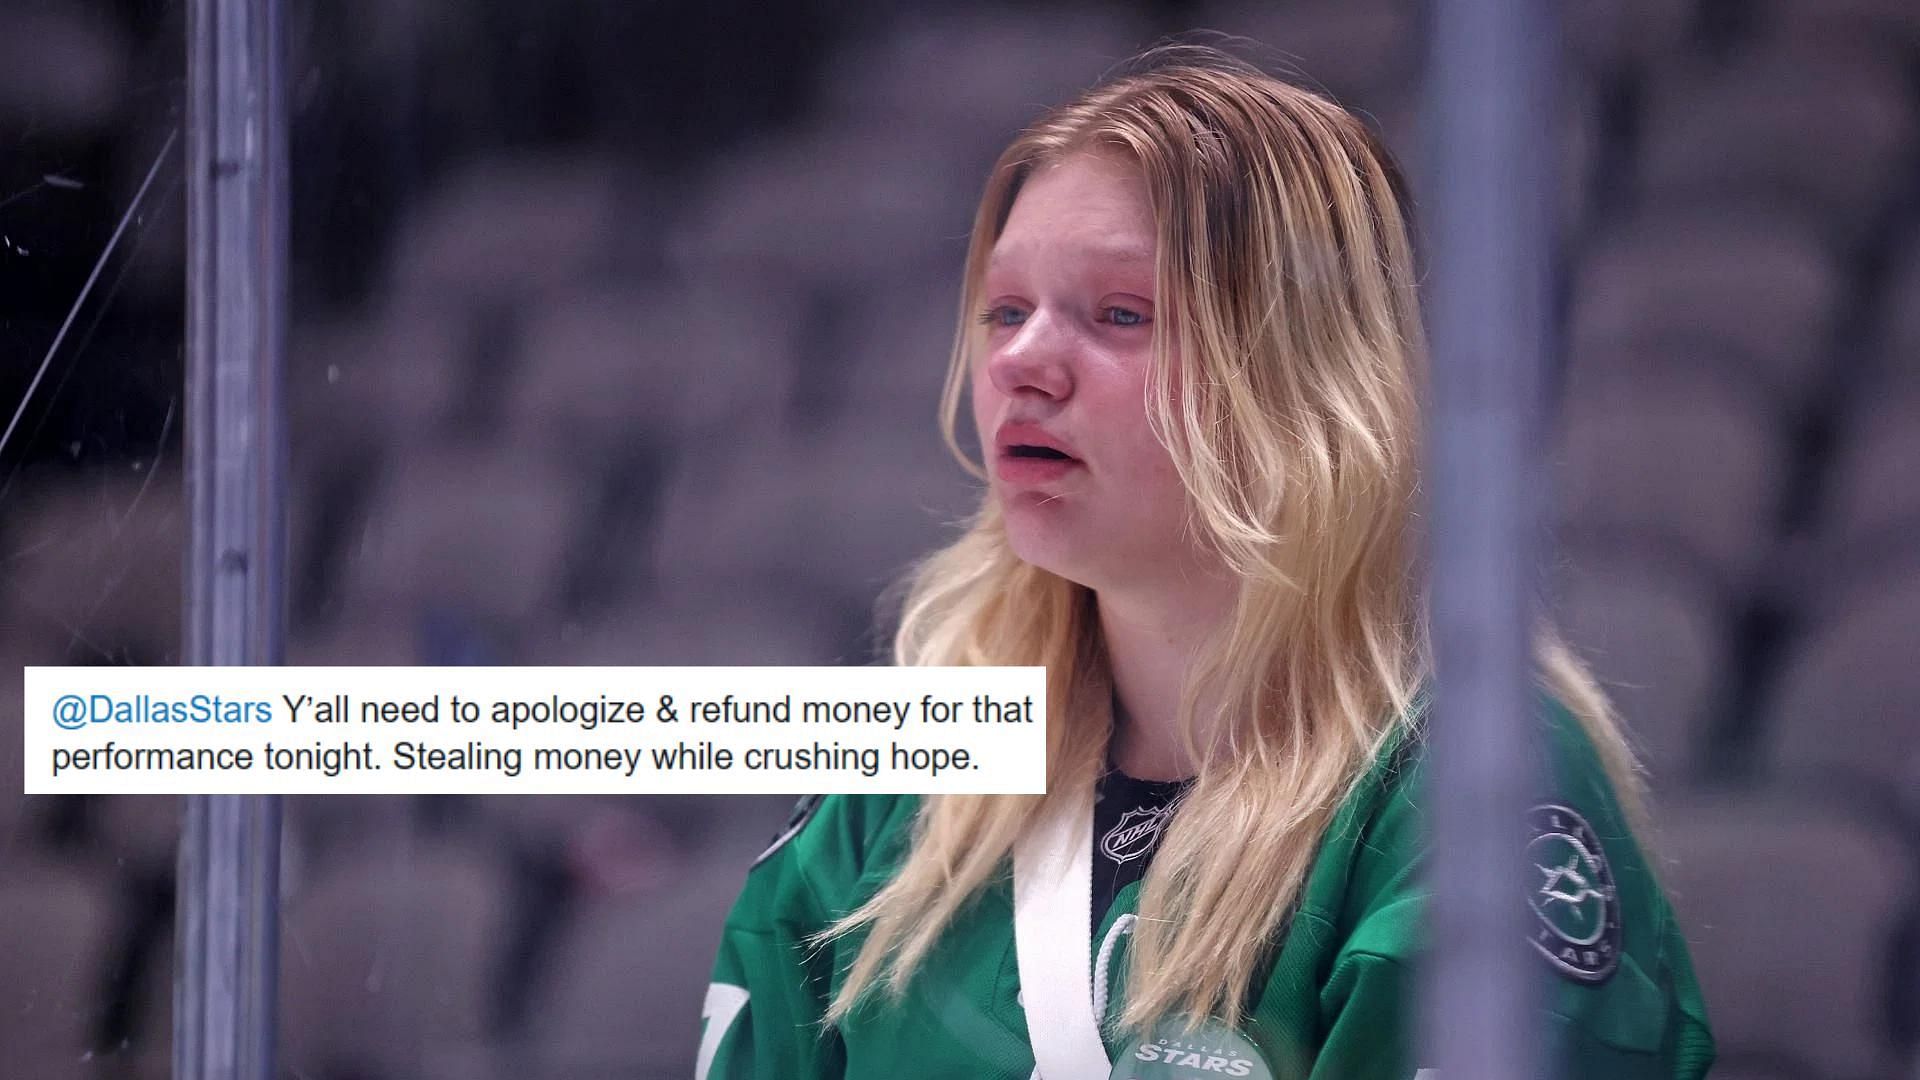 Dallas Stars fans rip into team after limp performance in Game 6 against Golden Knights